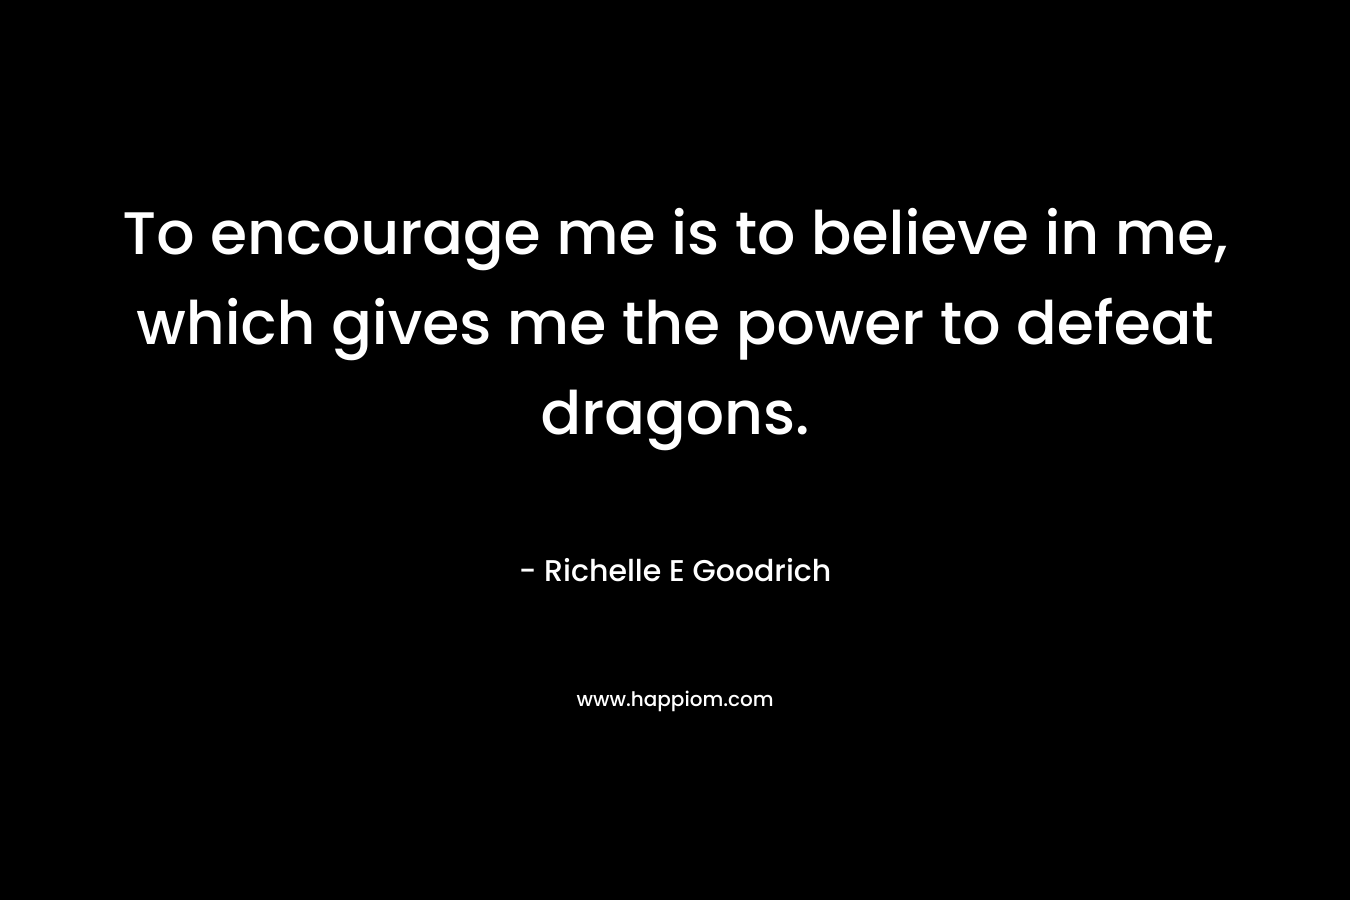 To encourage me is to believe in me, which gives me the power to defeat dragons. – Richelle E Goodrich